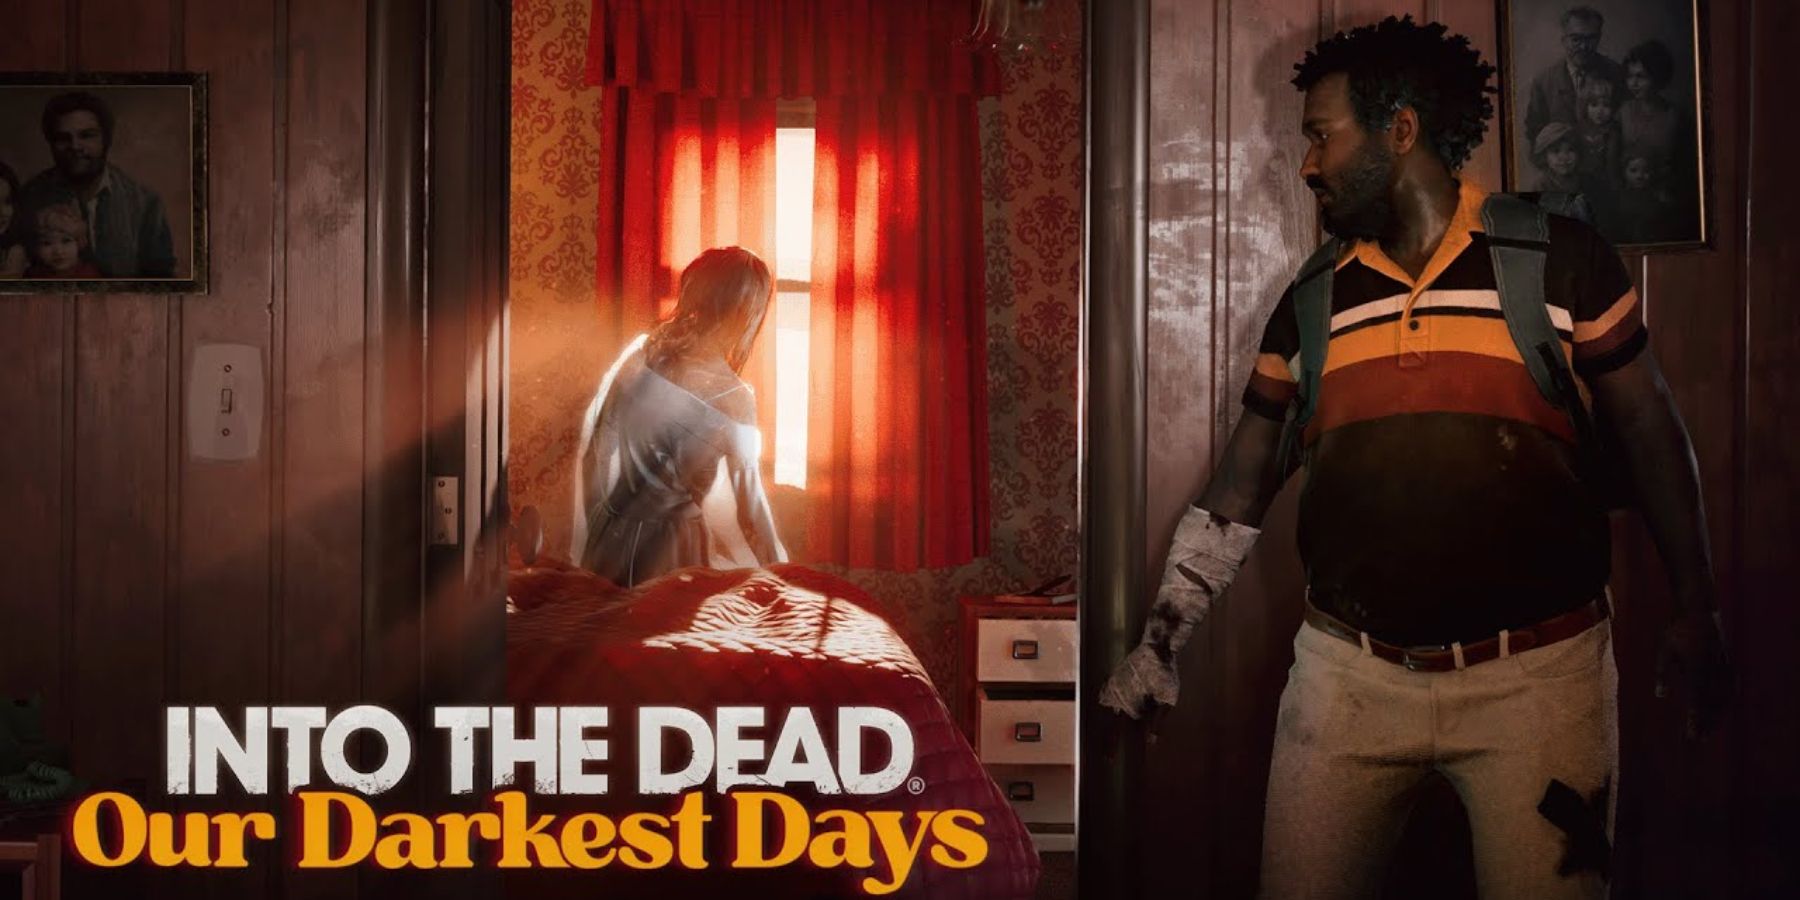 into the dead will hopefully be a genre shift that zombies need